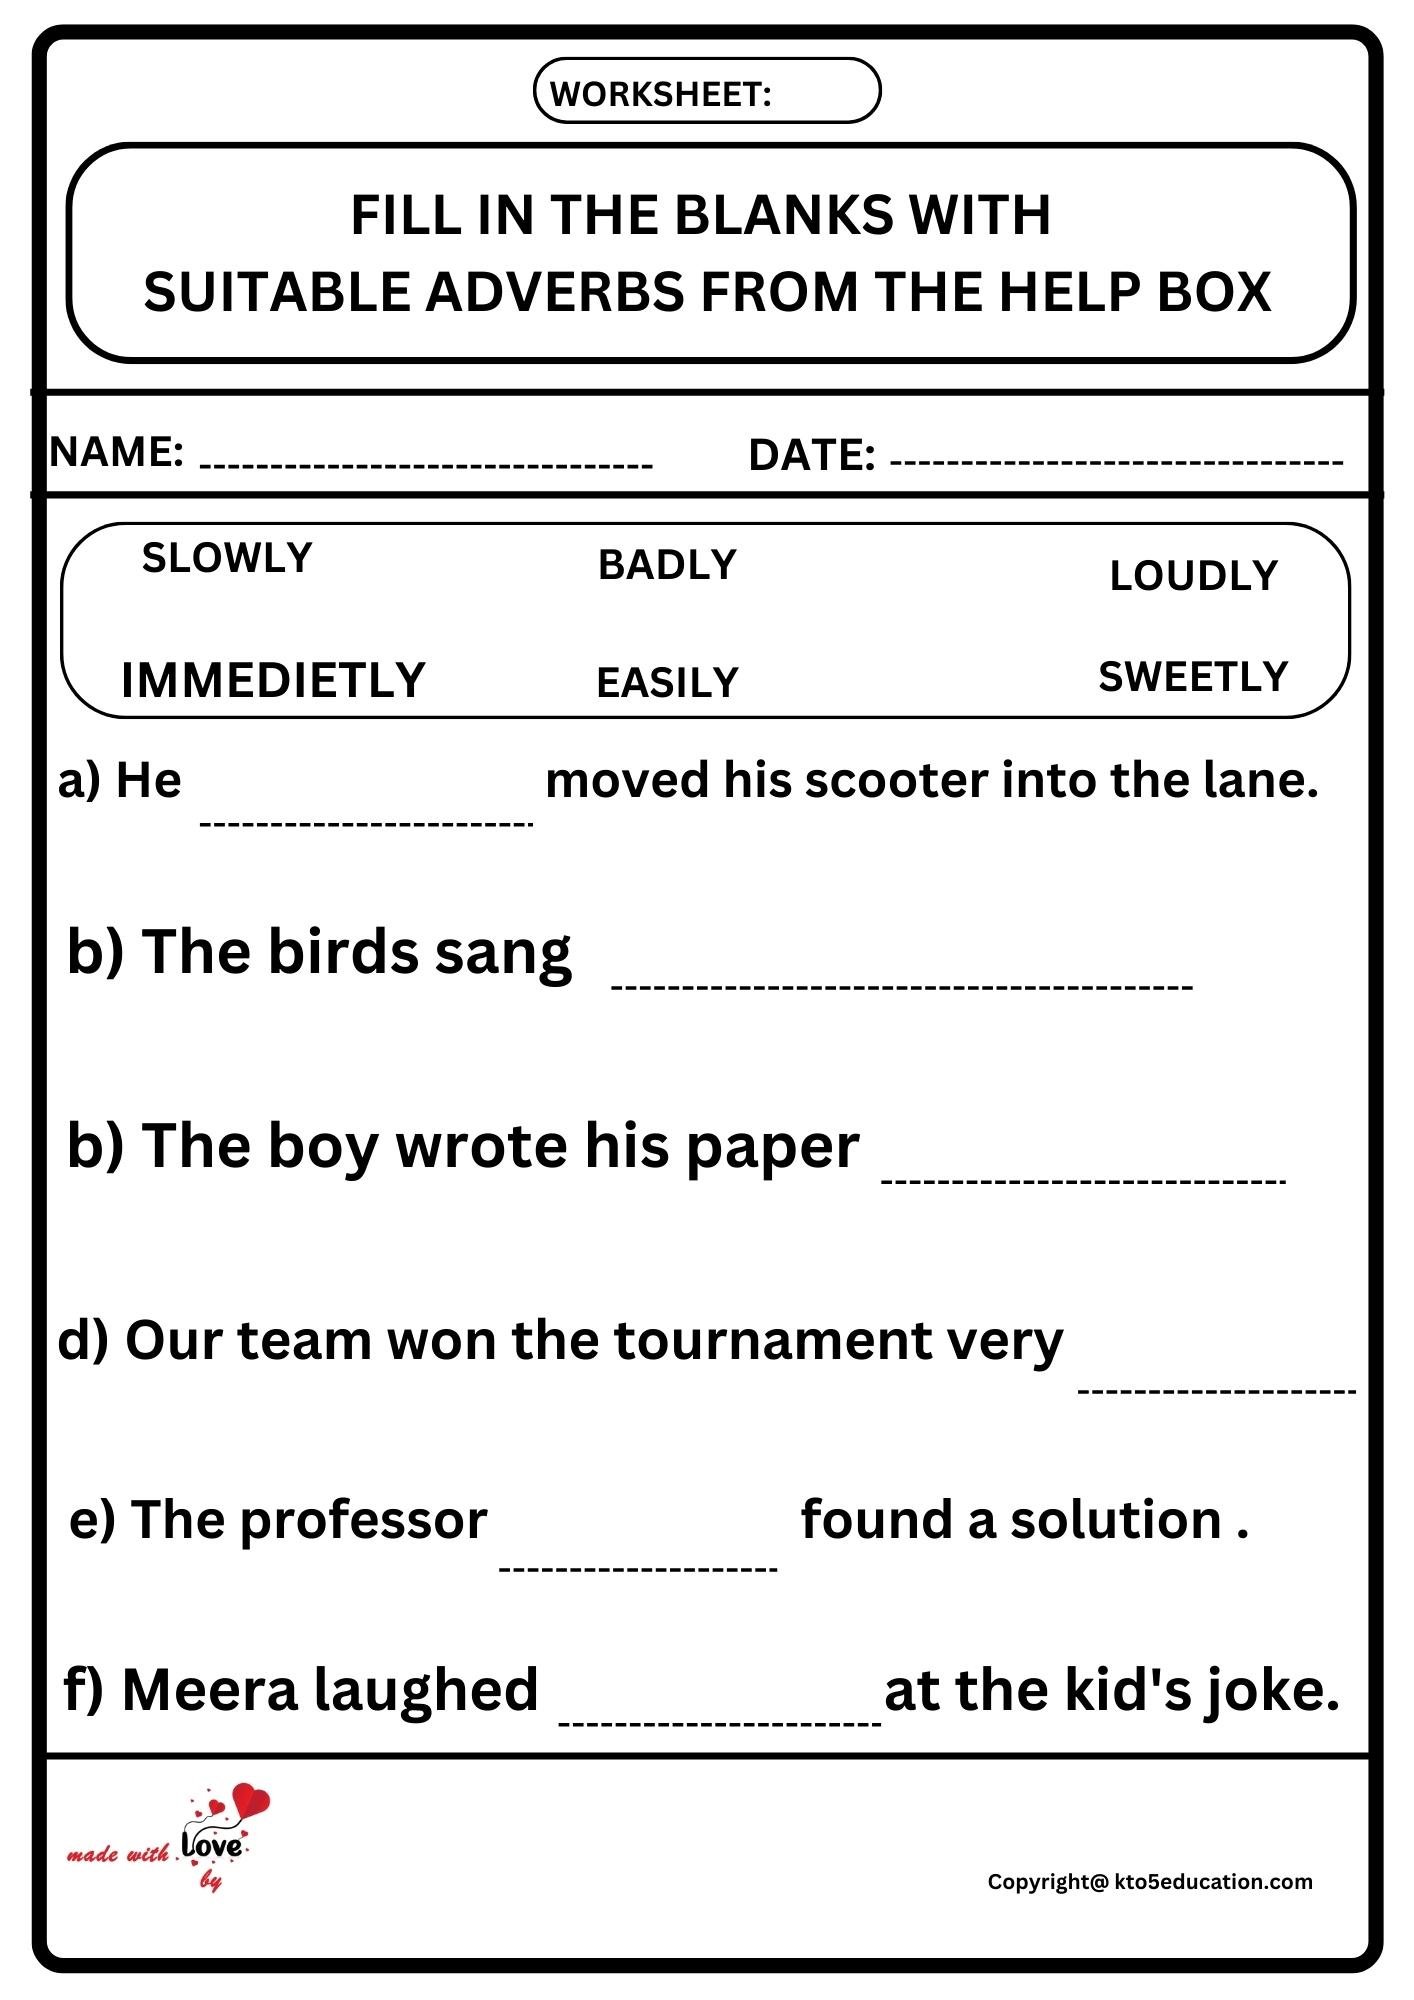 Fill in The Blanks With Suitable Adverbs From The Help Box Worksheet